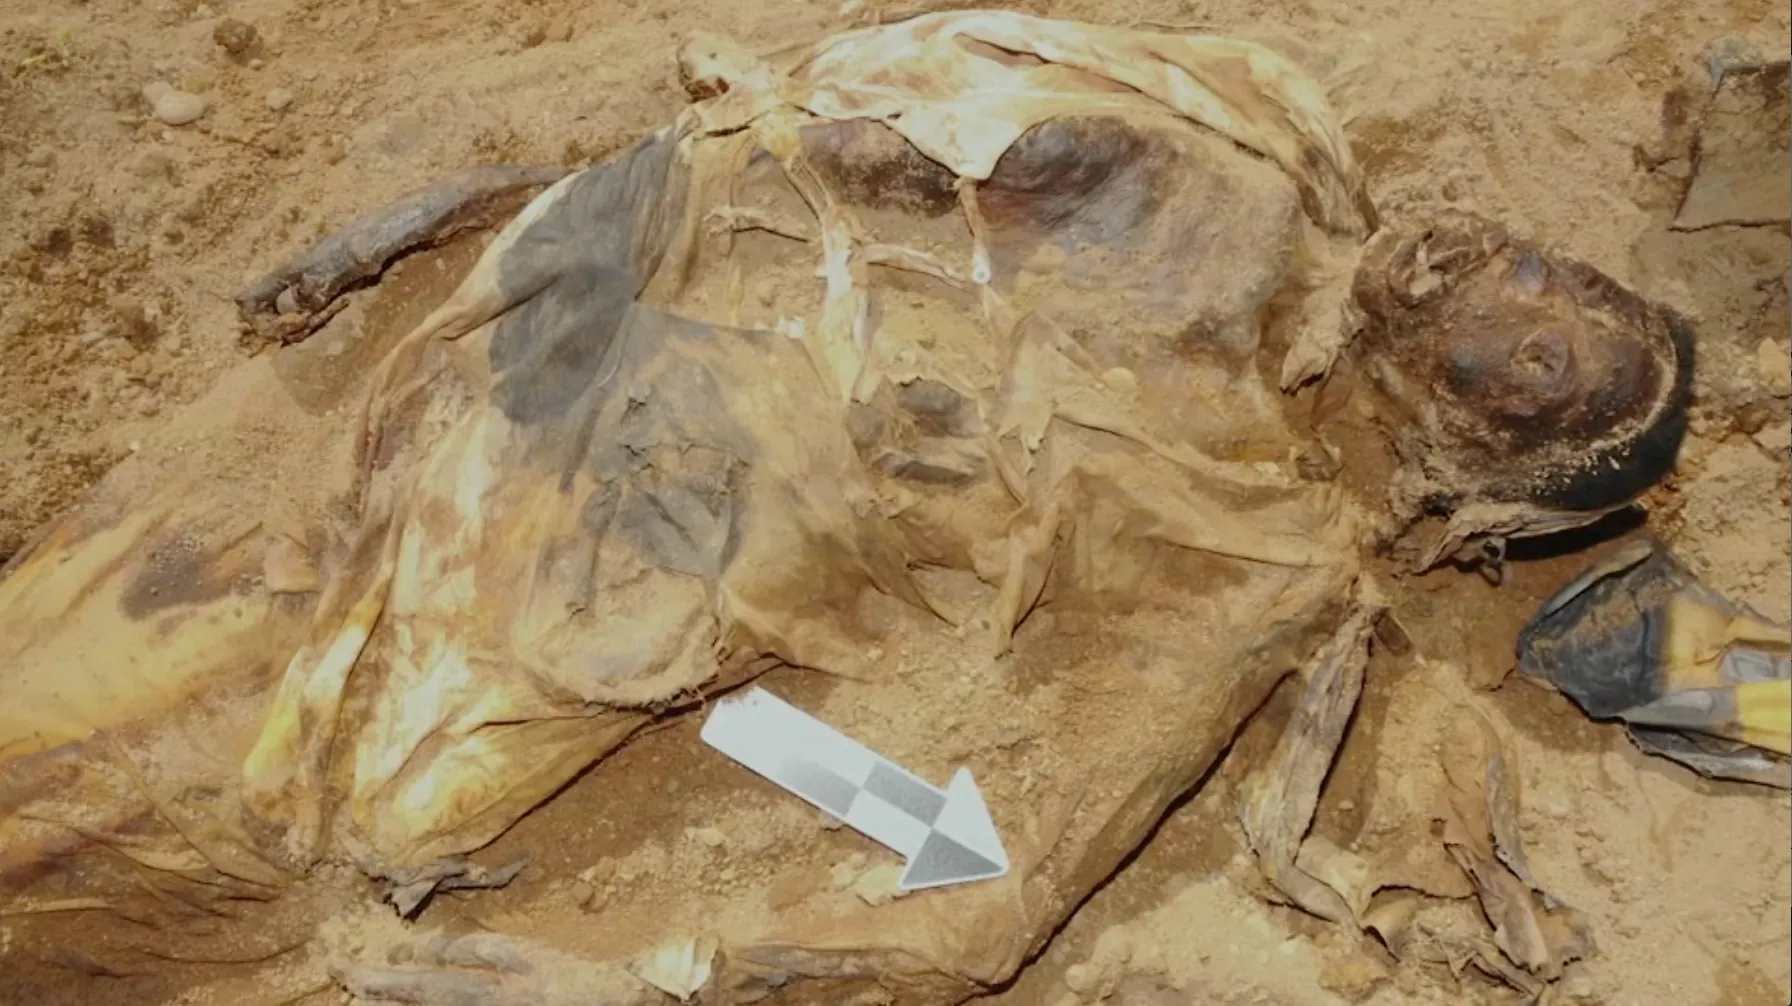 Airtight Iron Coffin Found In Queens Held A Mysterious Mummy